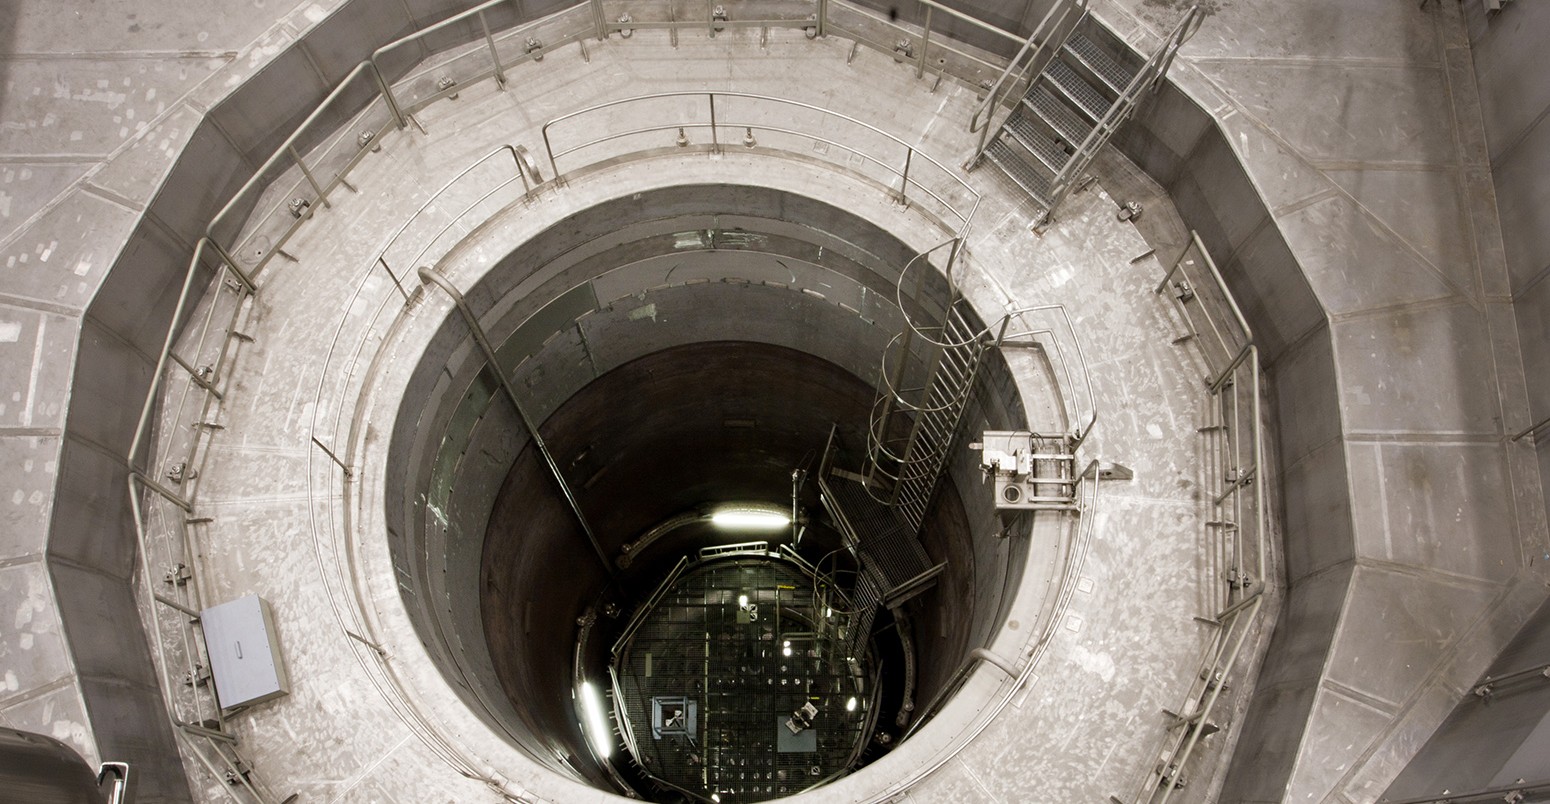 View into the reactor pressure vessel of Zwentendorf Nuclear Power Plant